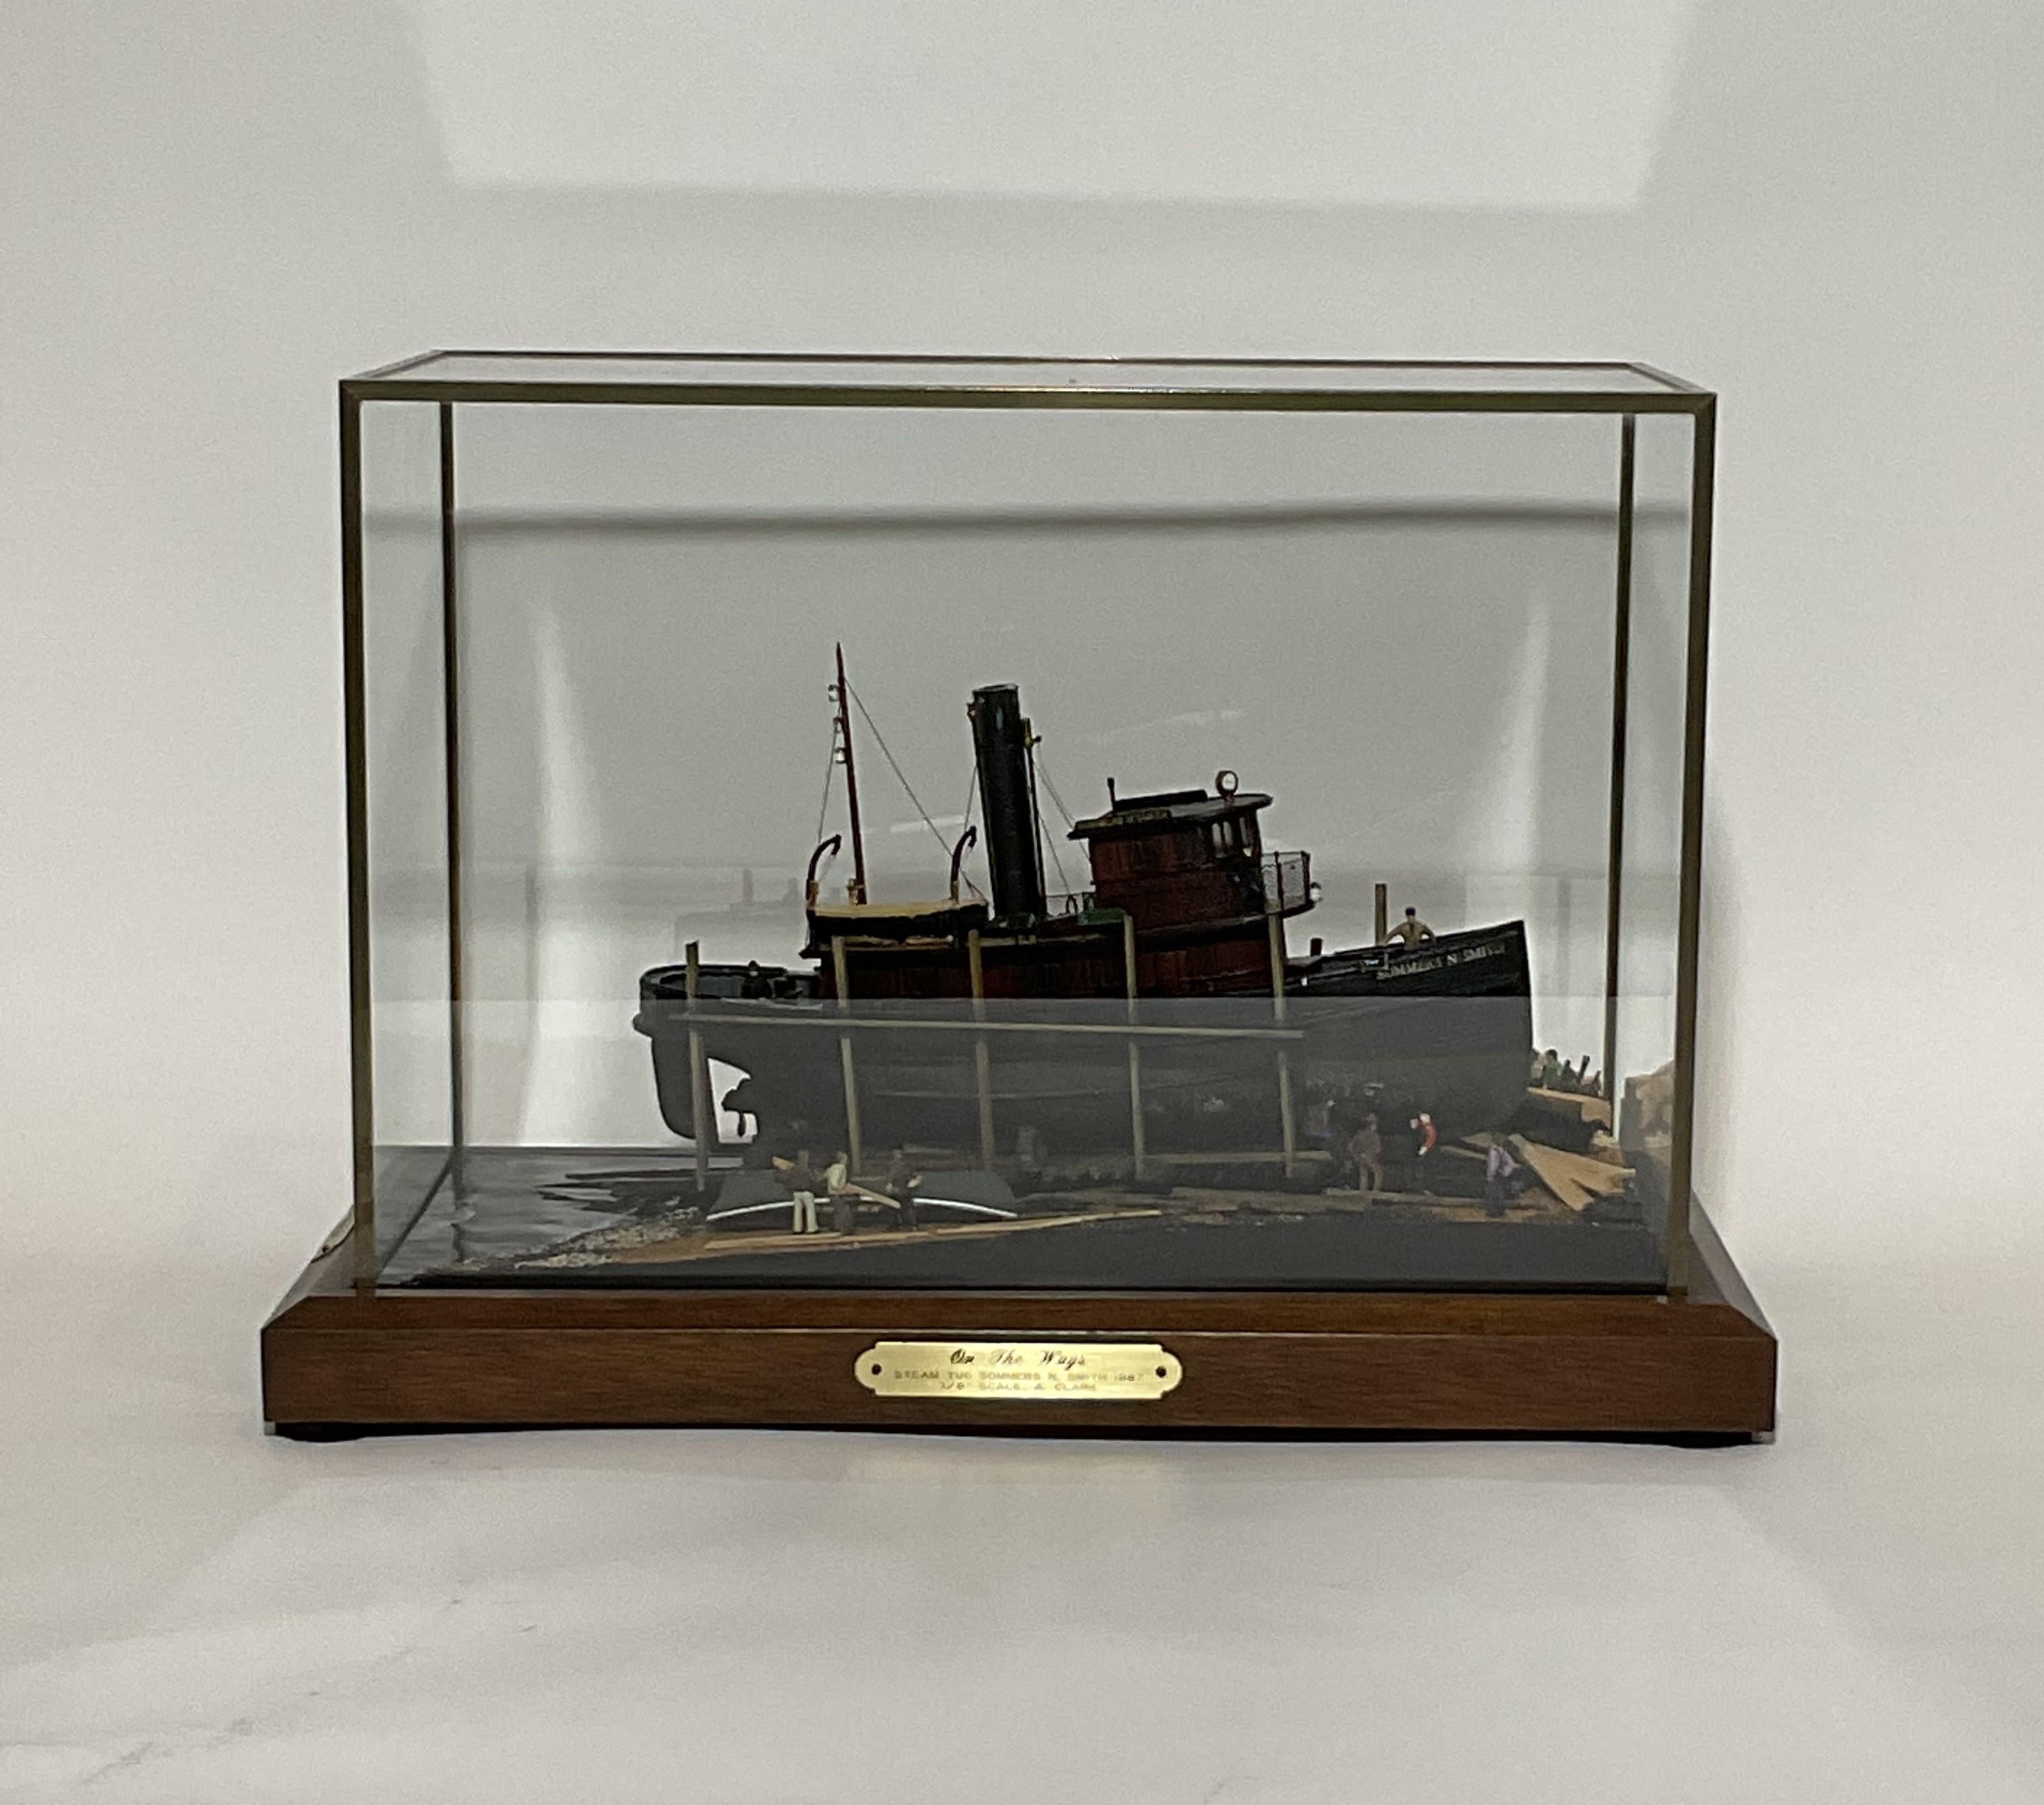 North American On The Ways Tugboat Diorama by Arthur Clark 8282 For Sale